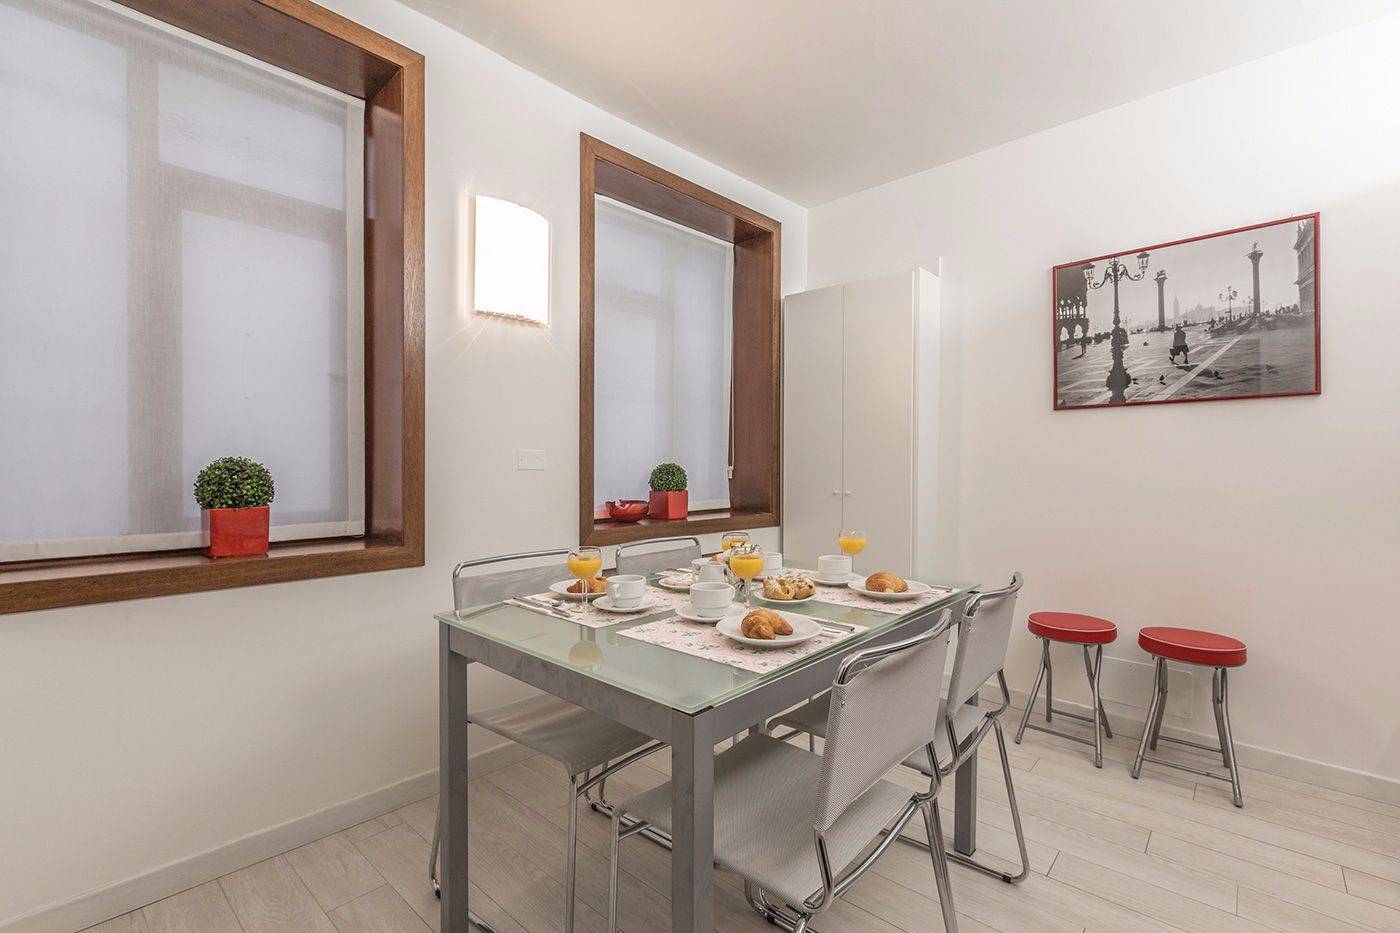 spacious and well equipped kitchen, perfect for family dining...